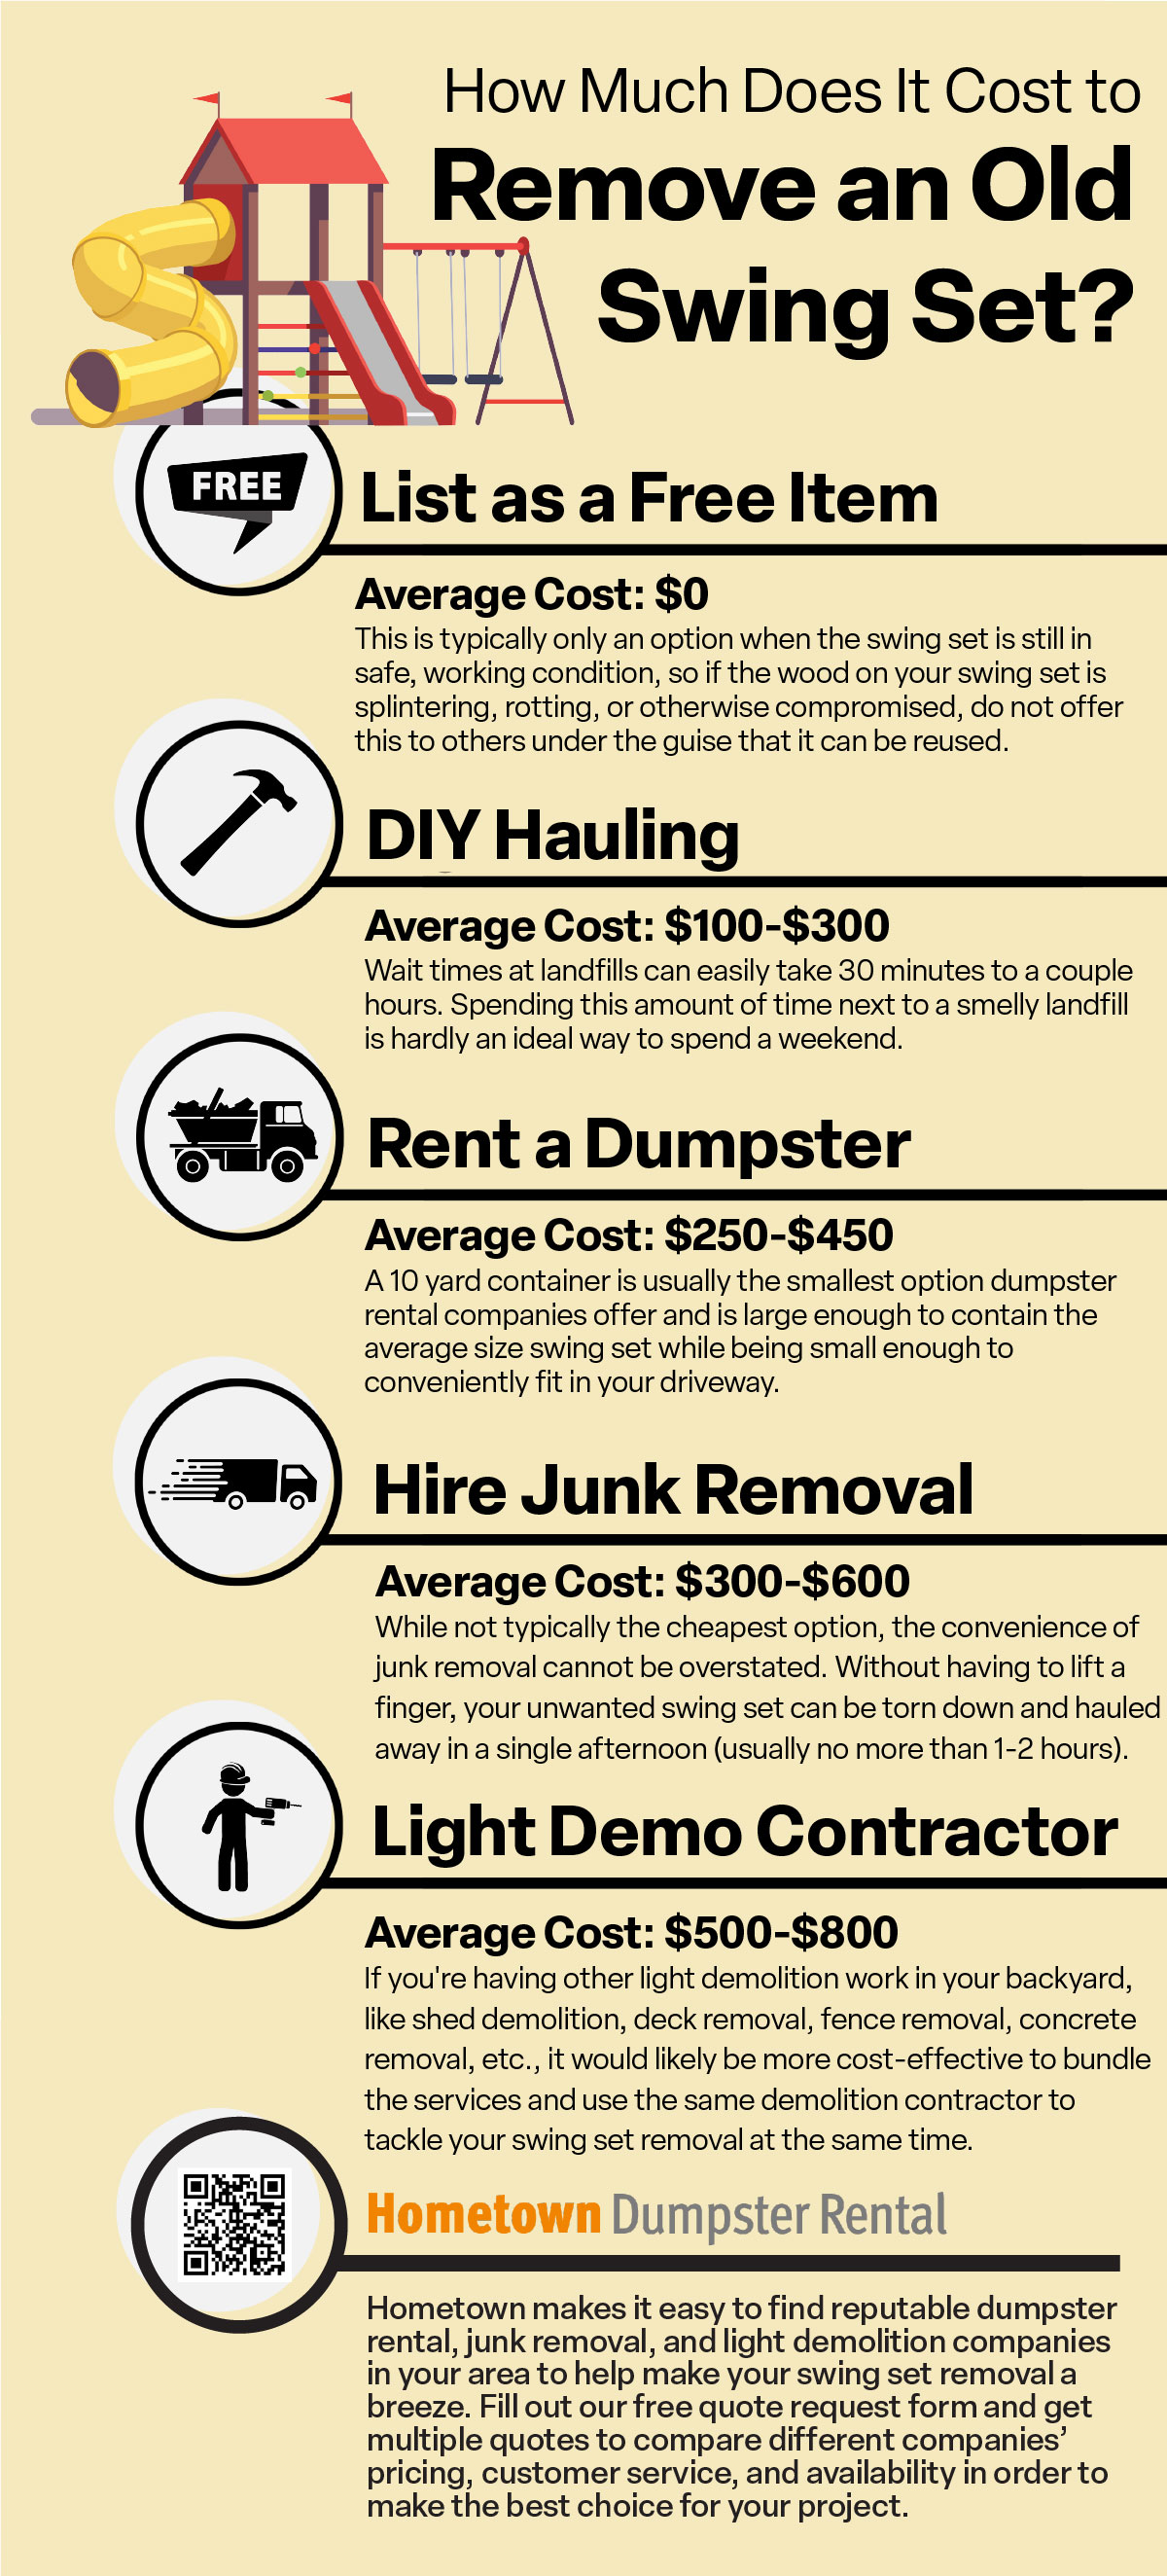 How Much Does It Cost to Remove an Old Swing Set Infographic